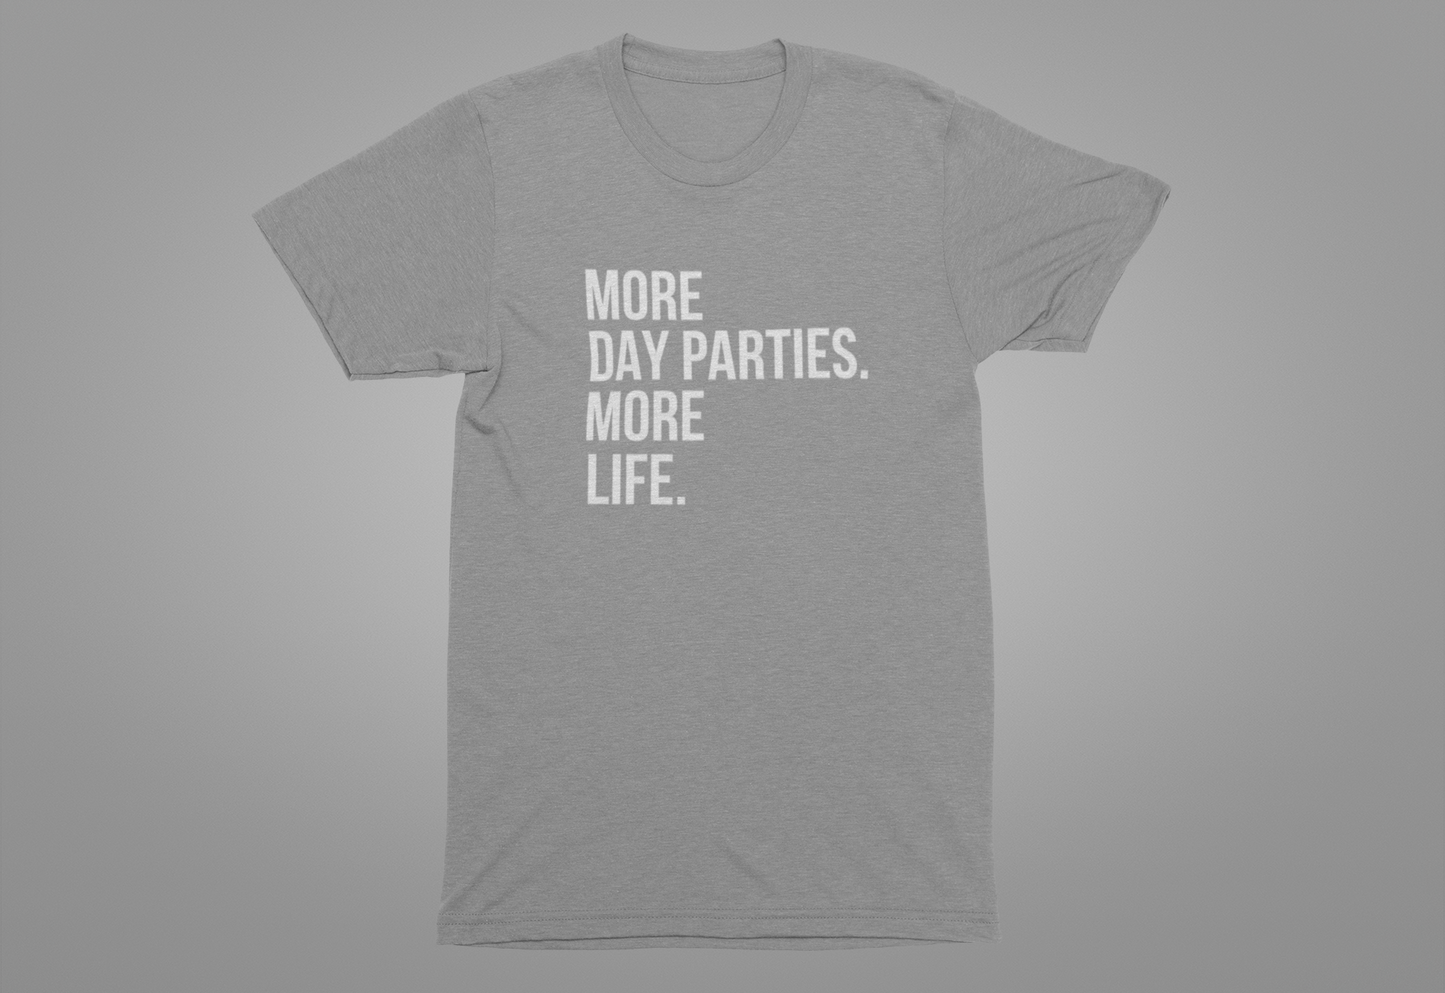 More Day Parties. More Life.